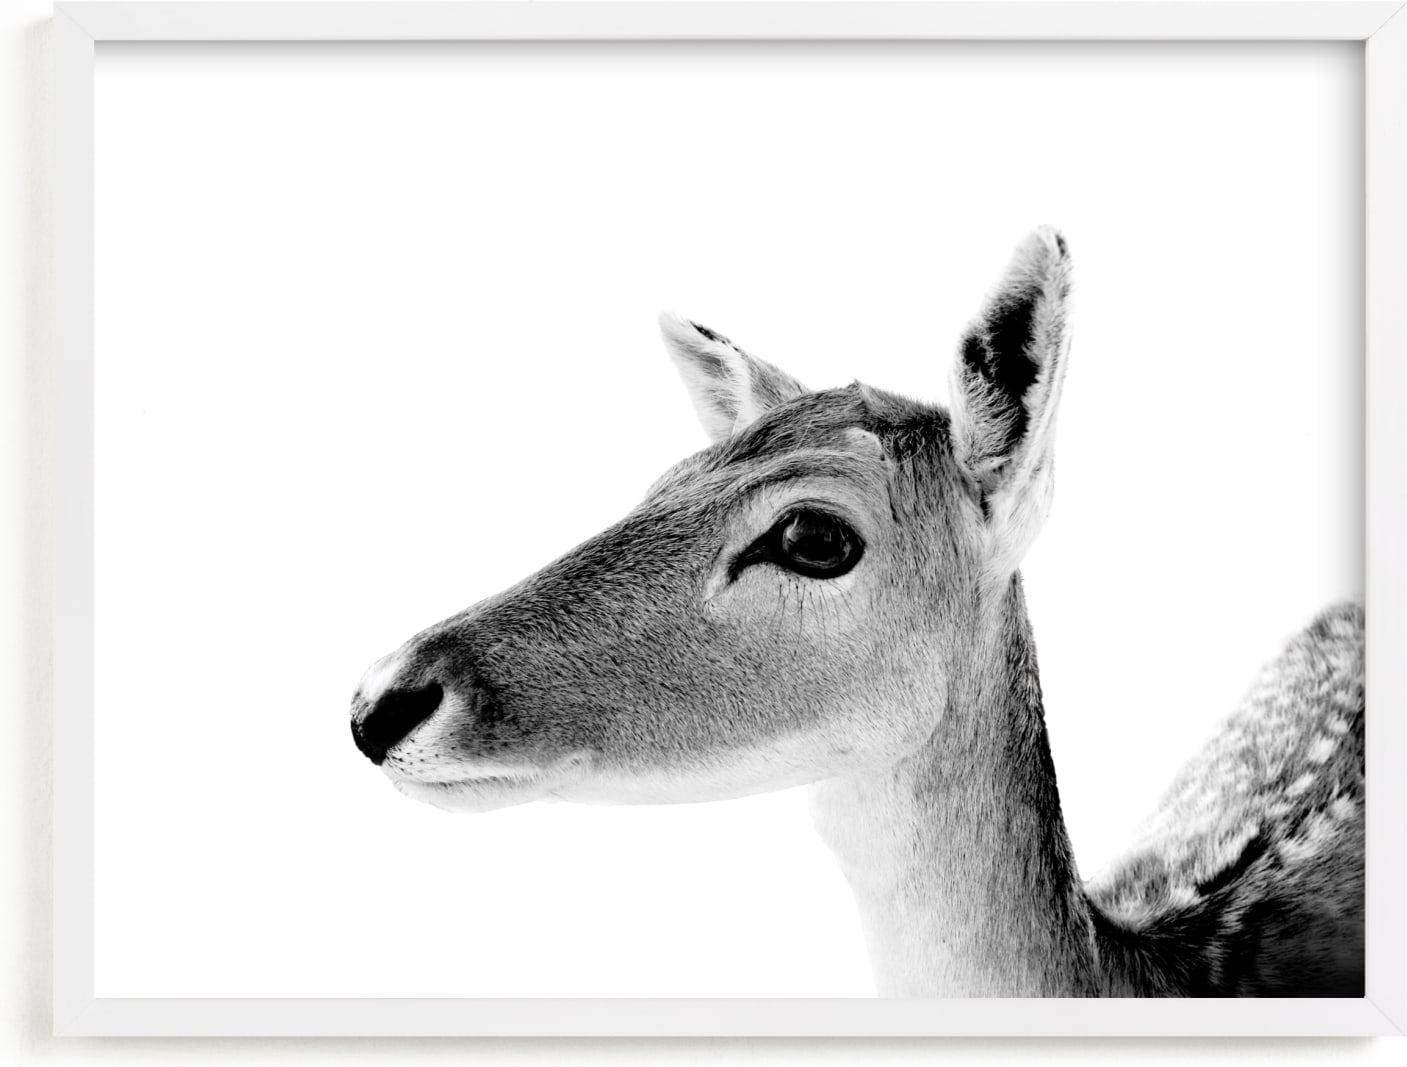 This is a black and white art by Jessie Steury called Darling Deer.